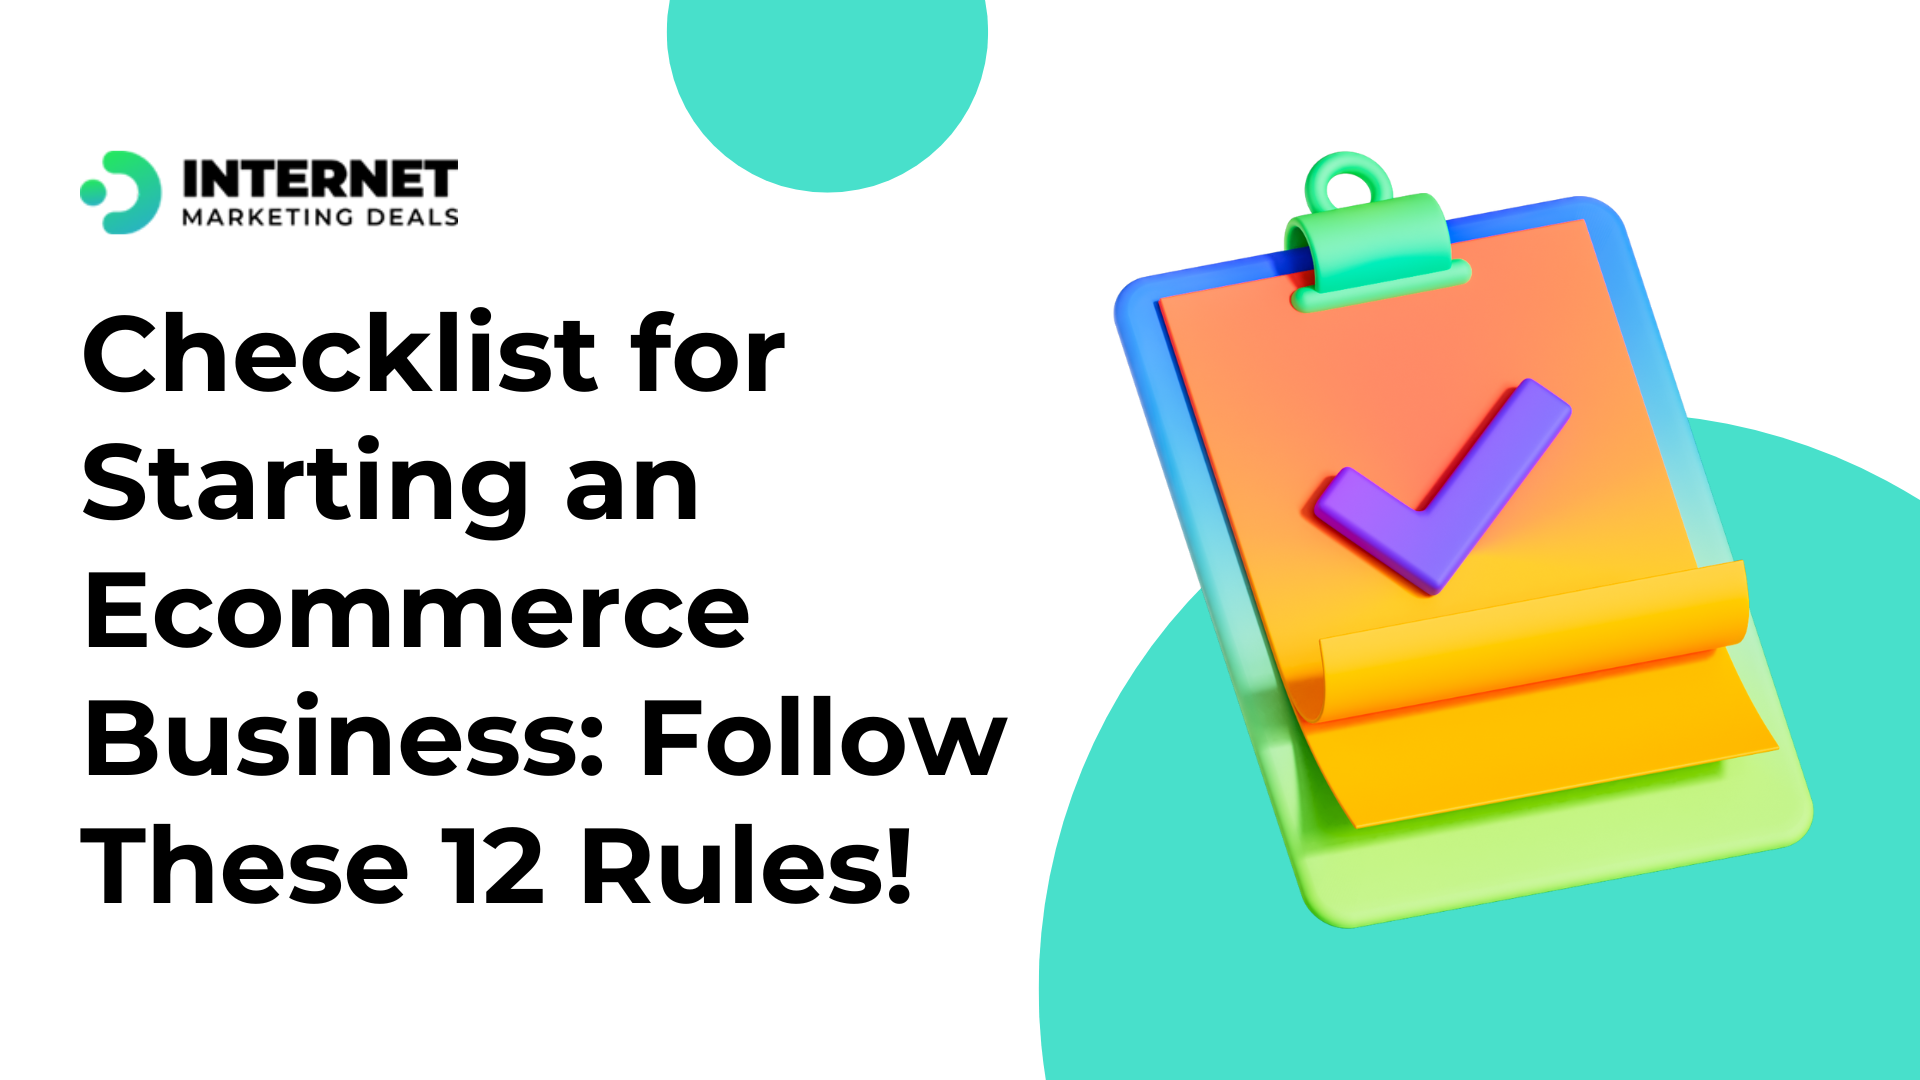 Checklist for Starting an Ecommerce Business: Follow These 12 Rules!